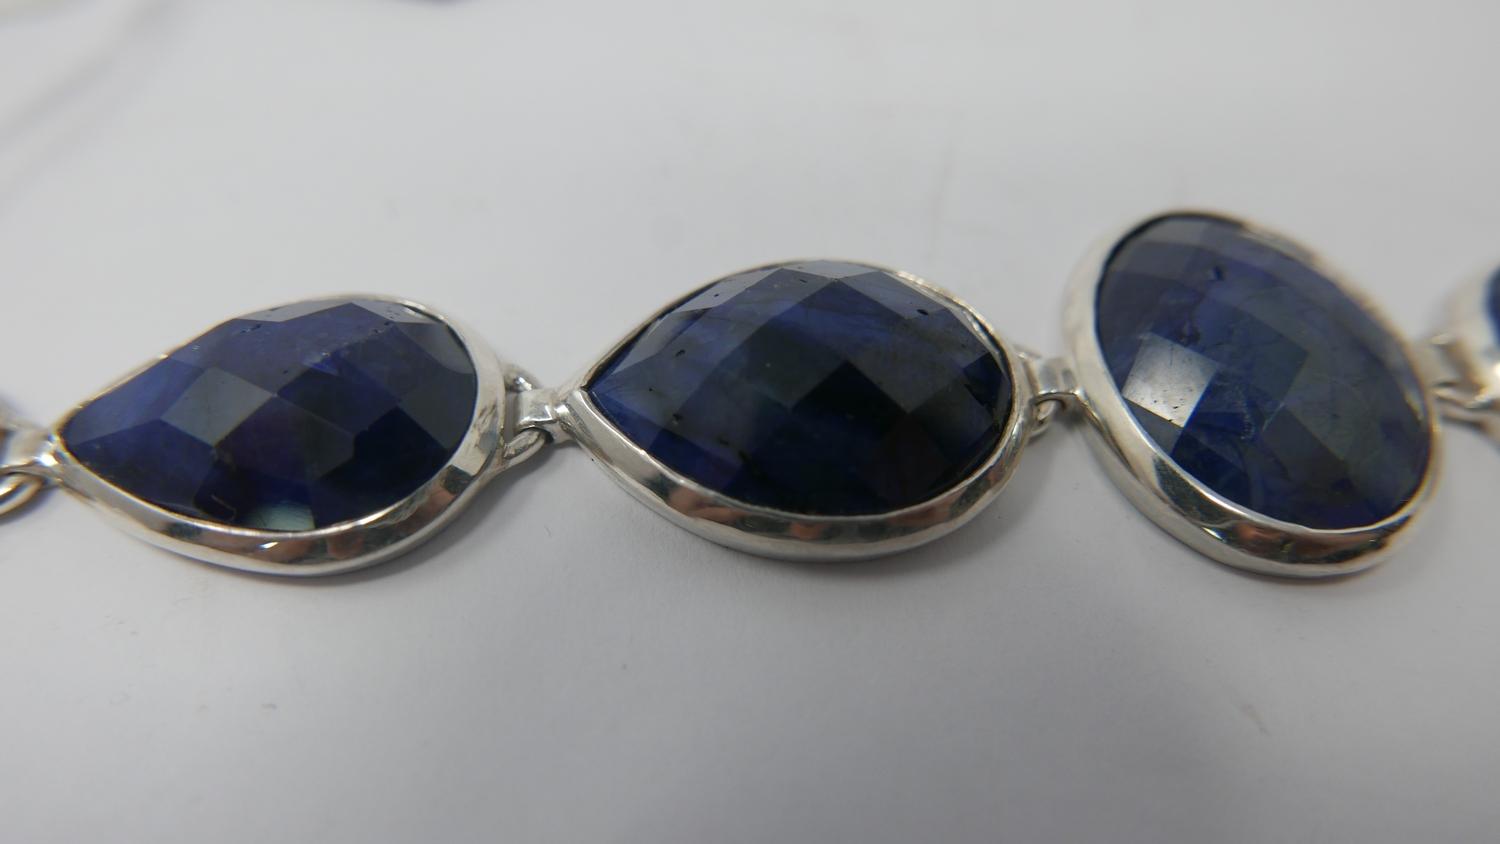 A sterling silver and natural sapphire bracelet composed of six graduated tear-drop sapphires and - Image 2 of 2